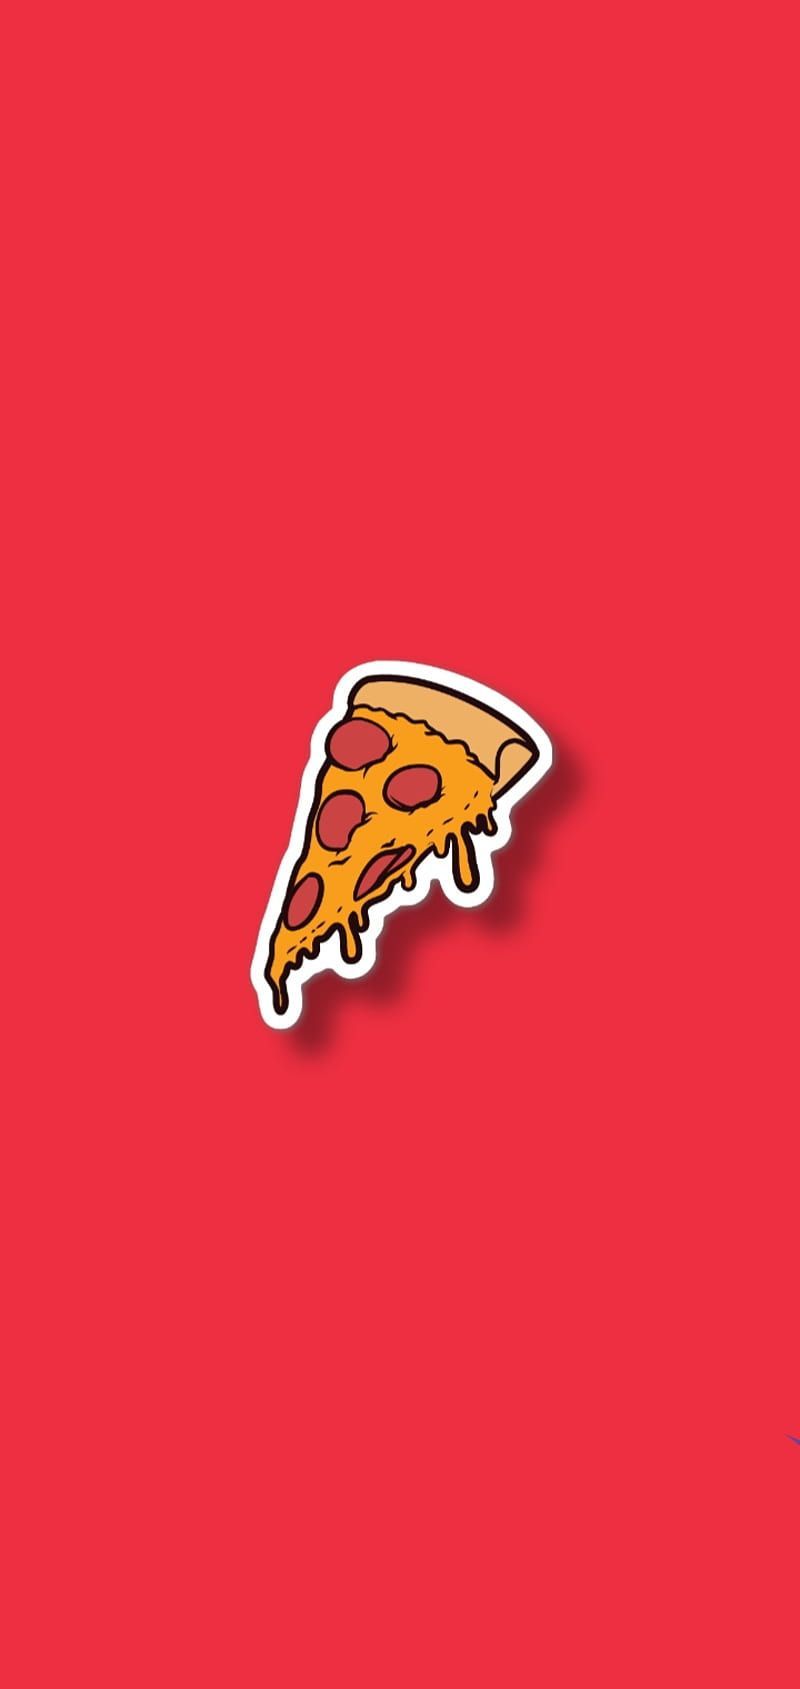 Pizza time, comida, edgy, food, minimalista, red, red, simple, HD phone wallpaper